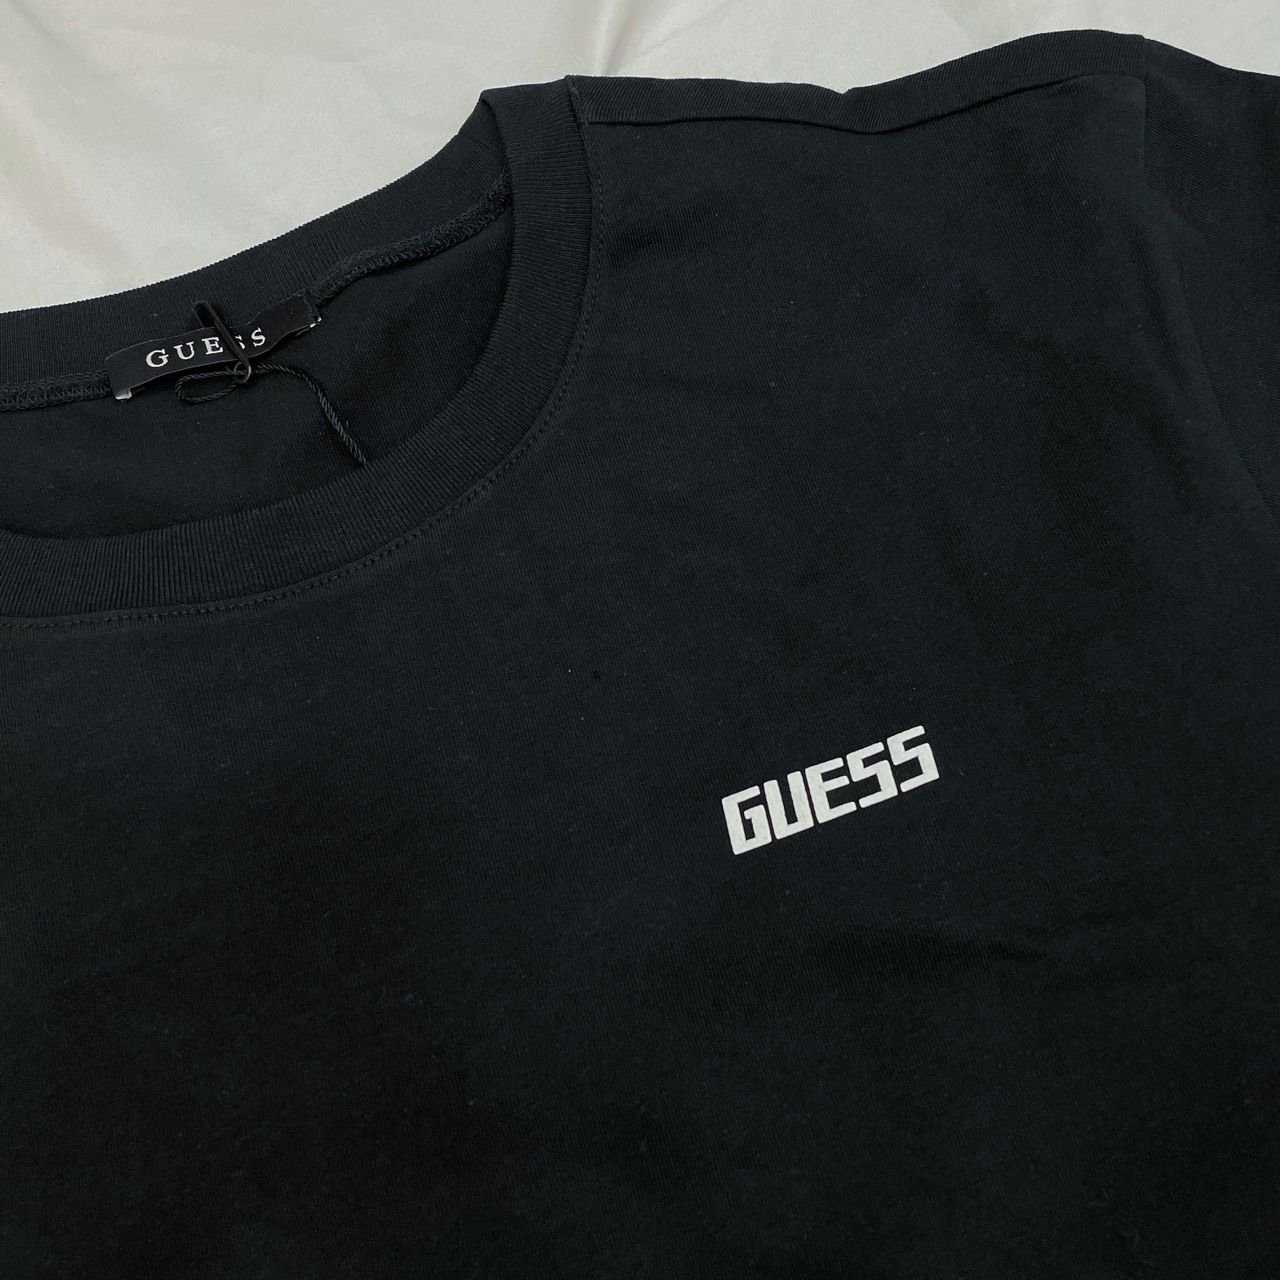 GUESS EMBROIDERED CHEST WORDING LOGO TEE - BLACK